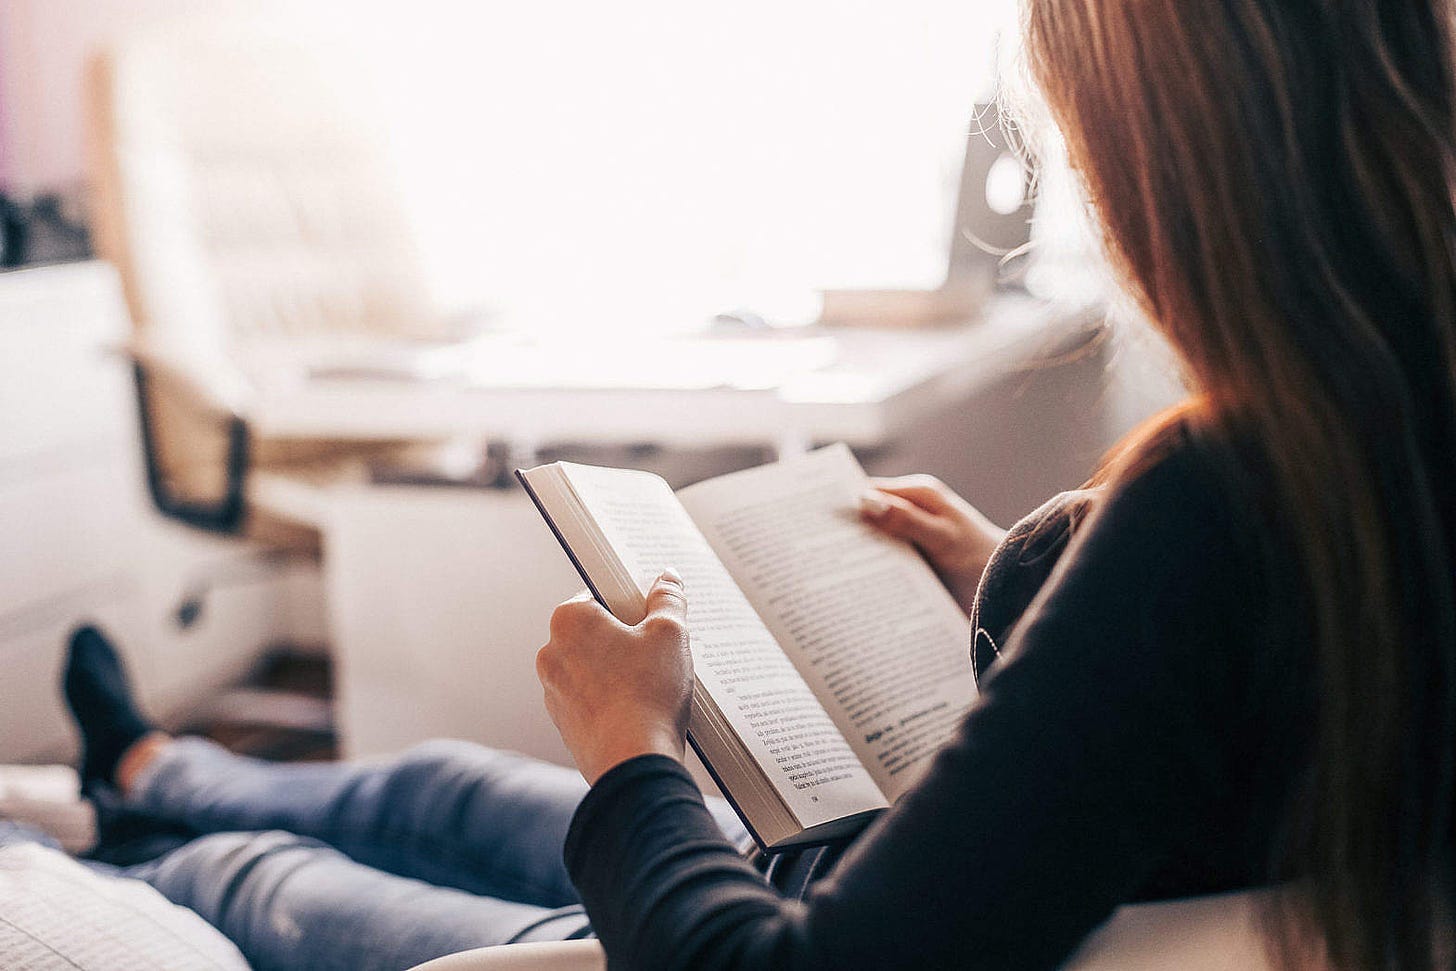 Girl Reading a Book at Home Free Stock Photo | picjumbo